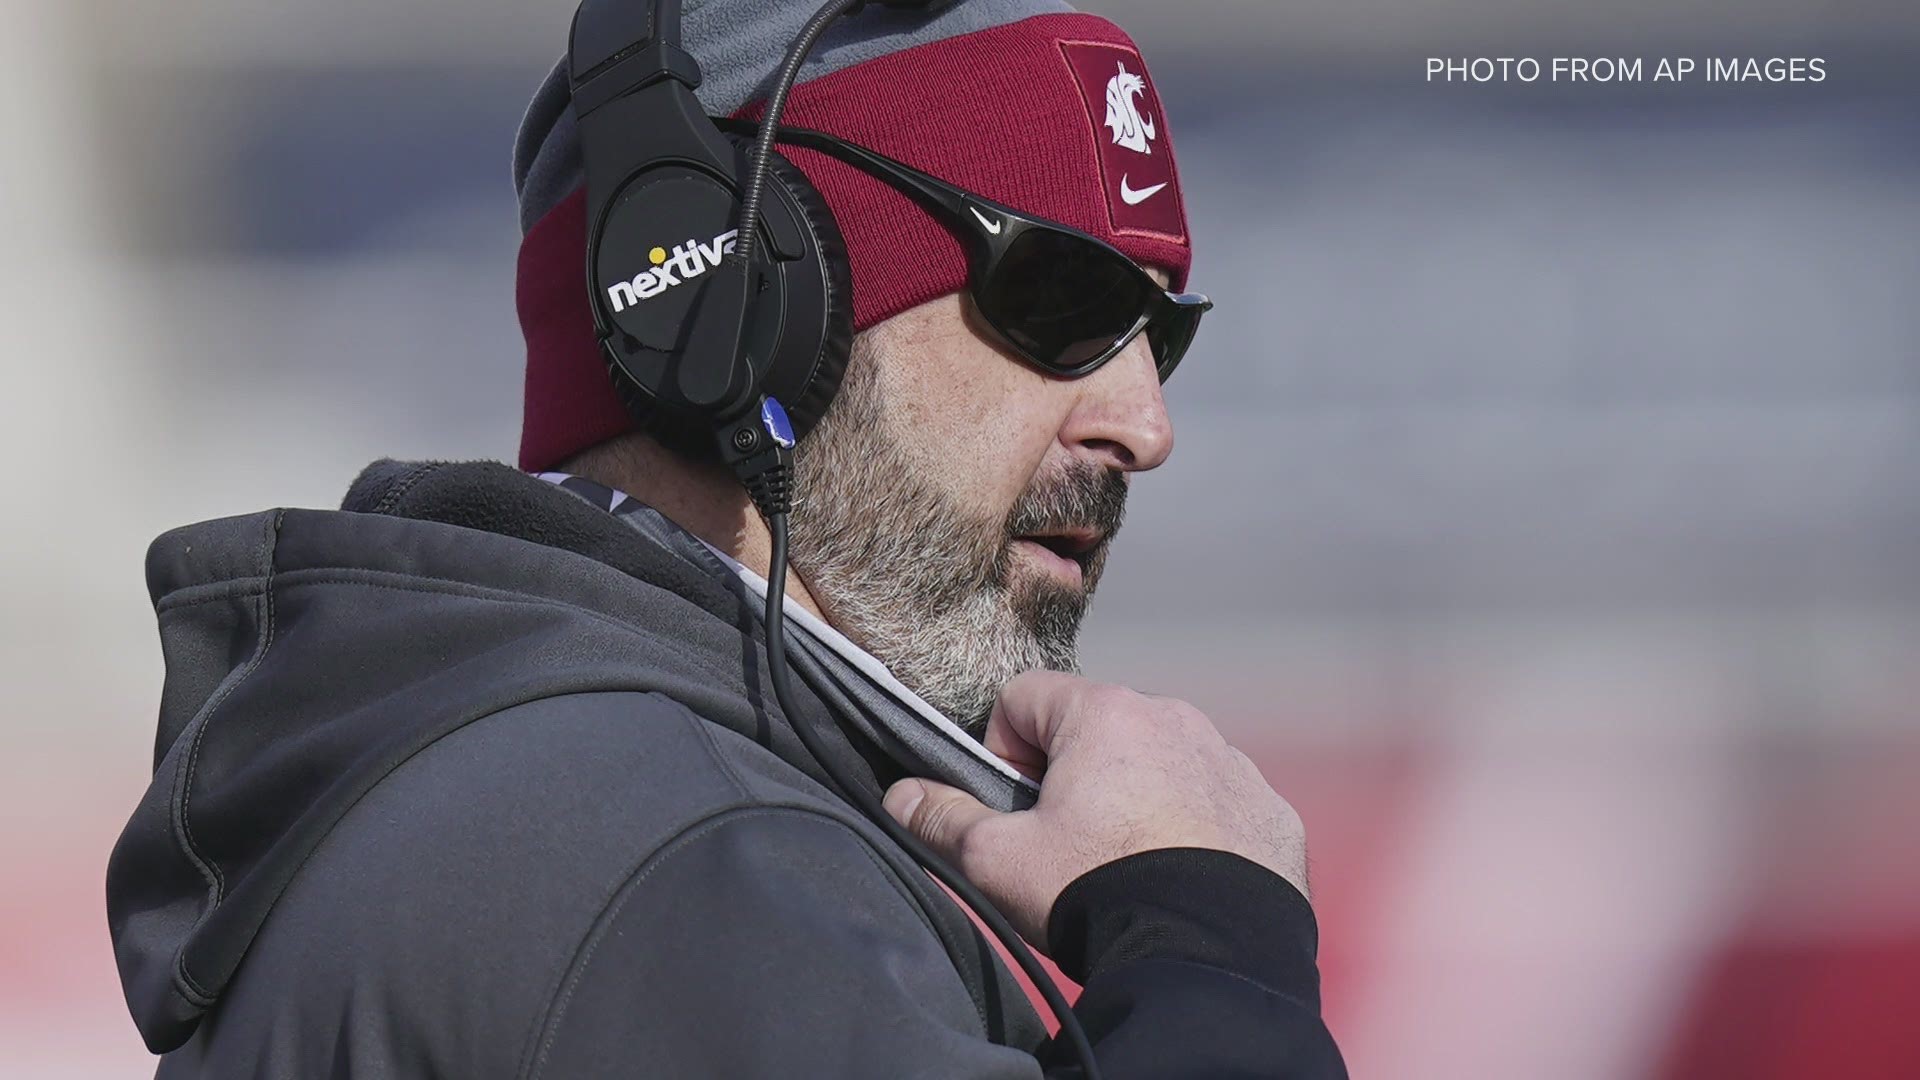 Washington State University's Head Football Coach Nick Rolovich tweeted Wednesday saying he has "elected not to receive a COVID-19 vaccine."